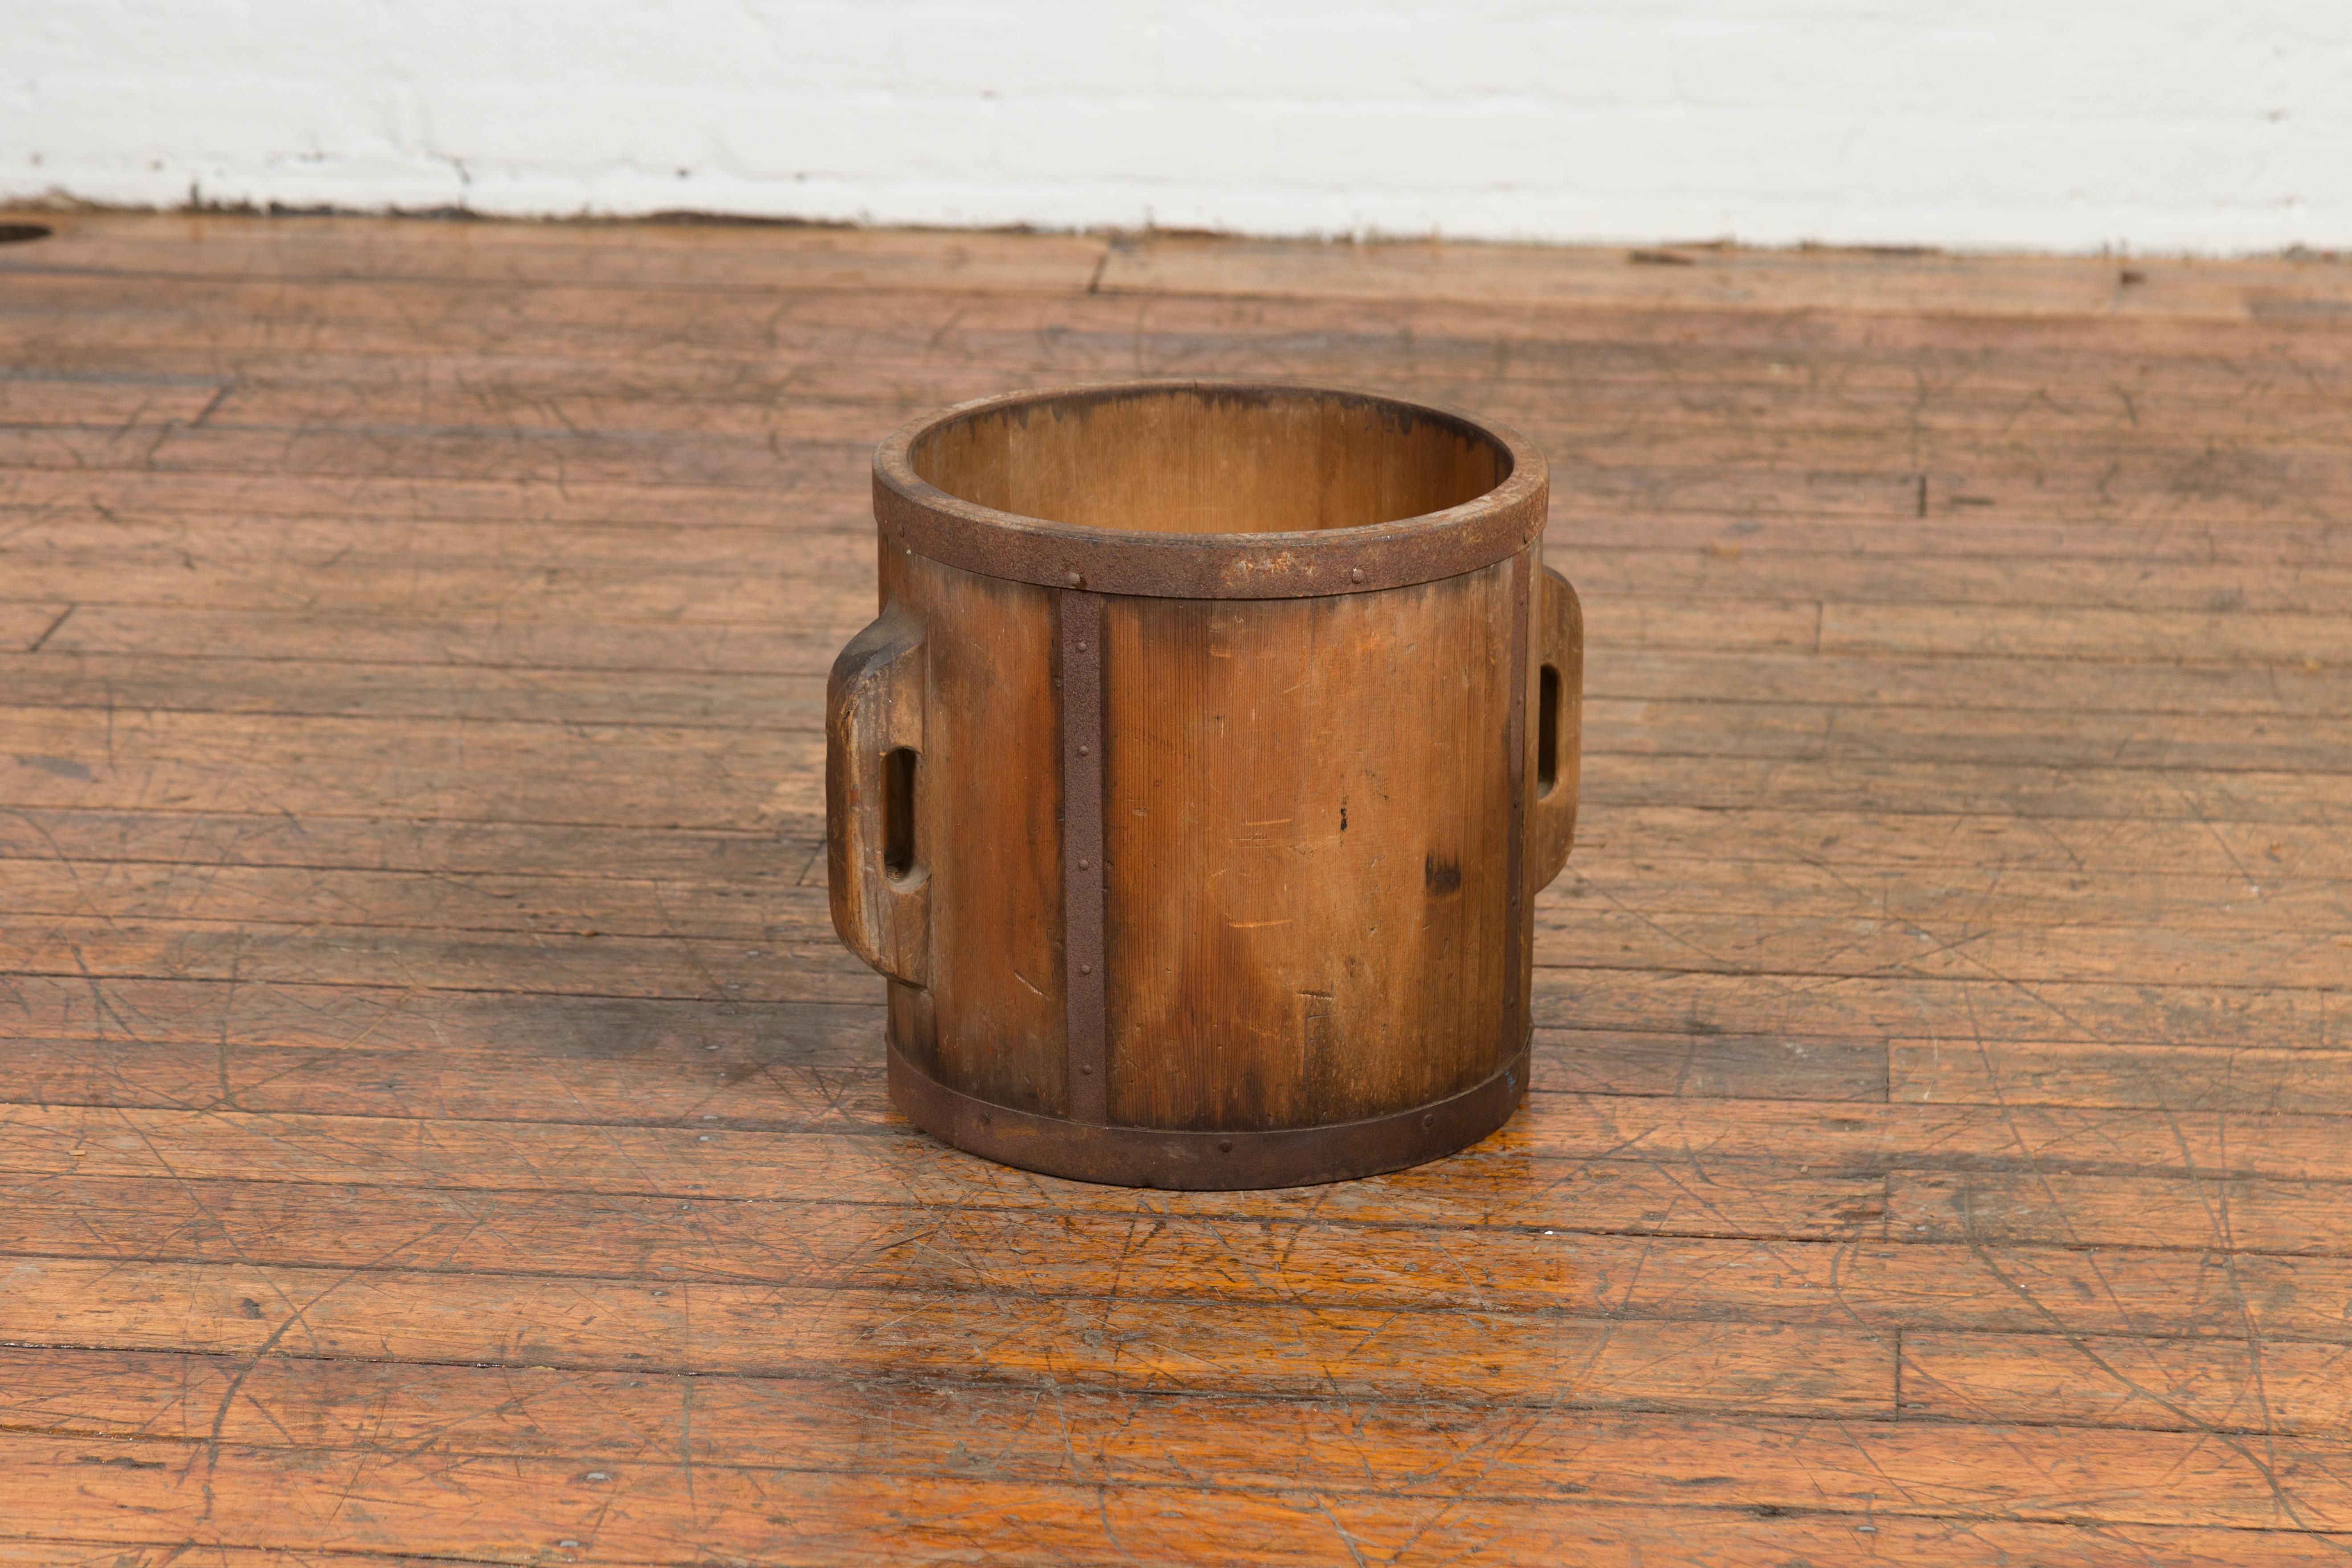 Wood Vintage Chinese Grain Measuring Cup with Metal Braces and Lateral Handles